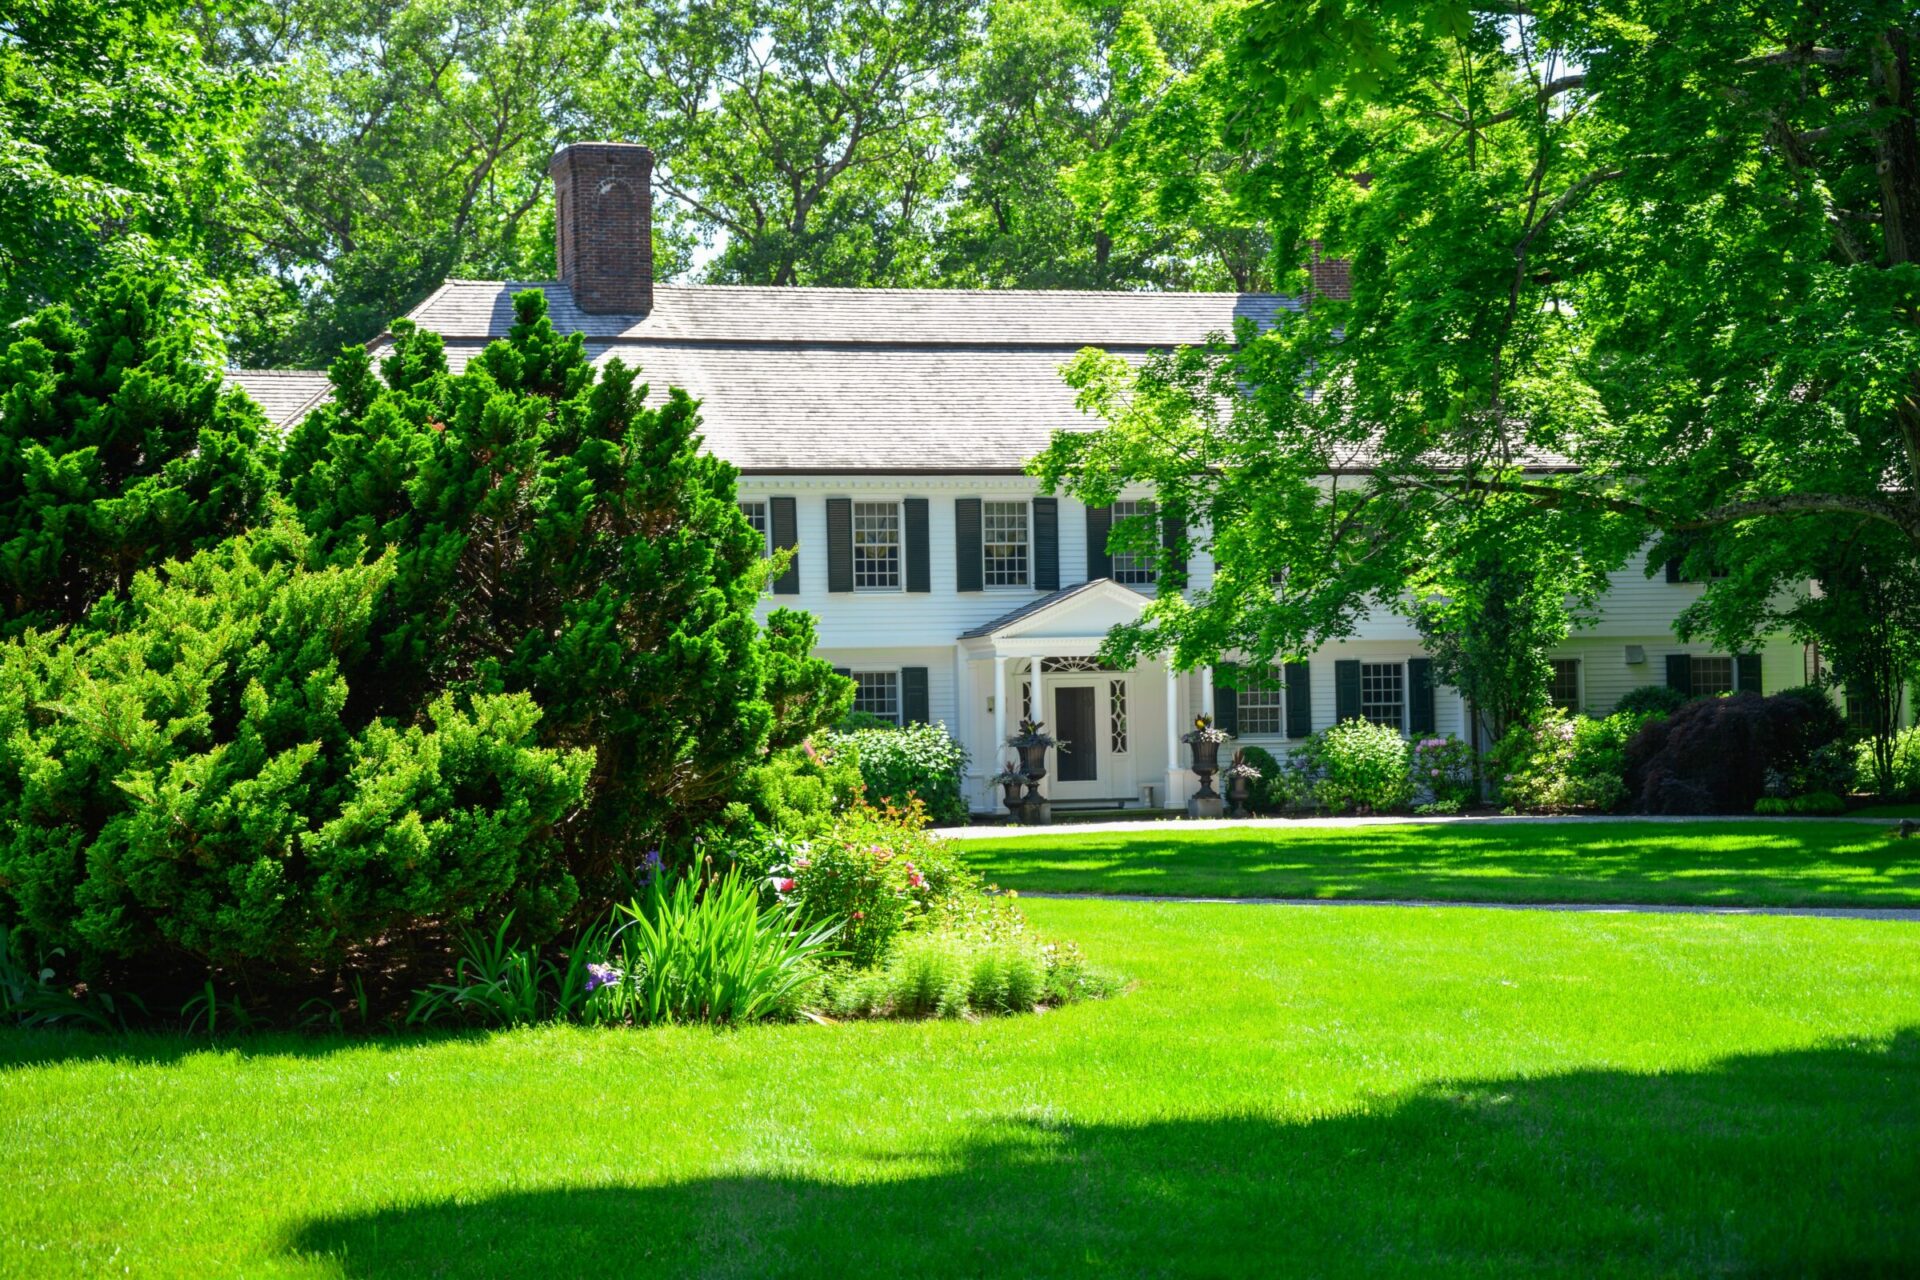 A two-story white house with black shutters, surrounded by lush greenery, under a clear blue sky. A well-manicured lawn enhances the tranquil setting.